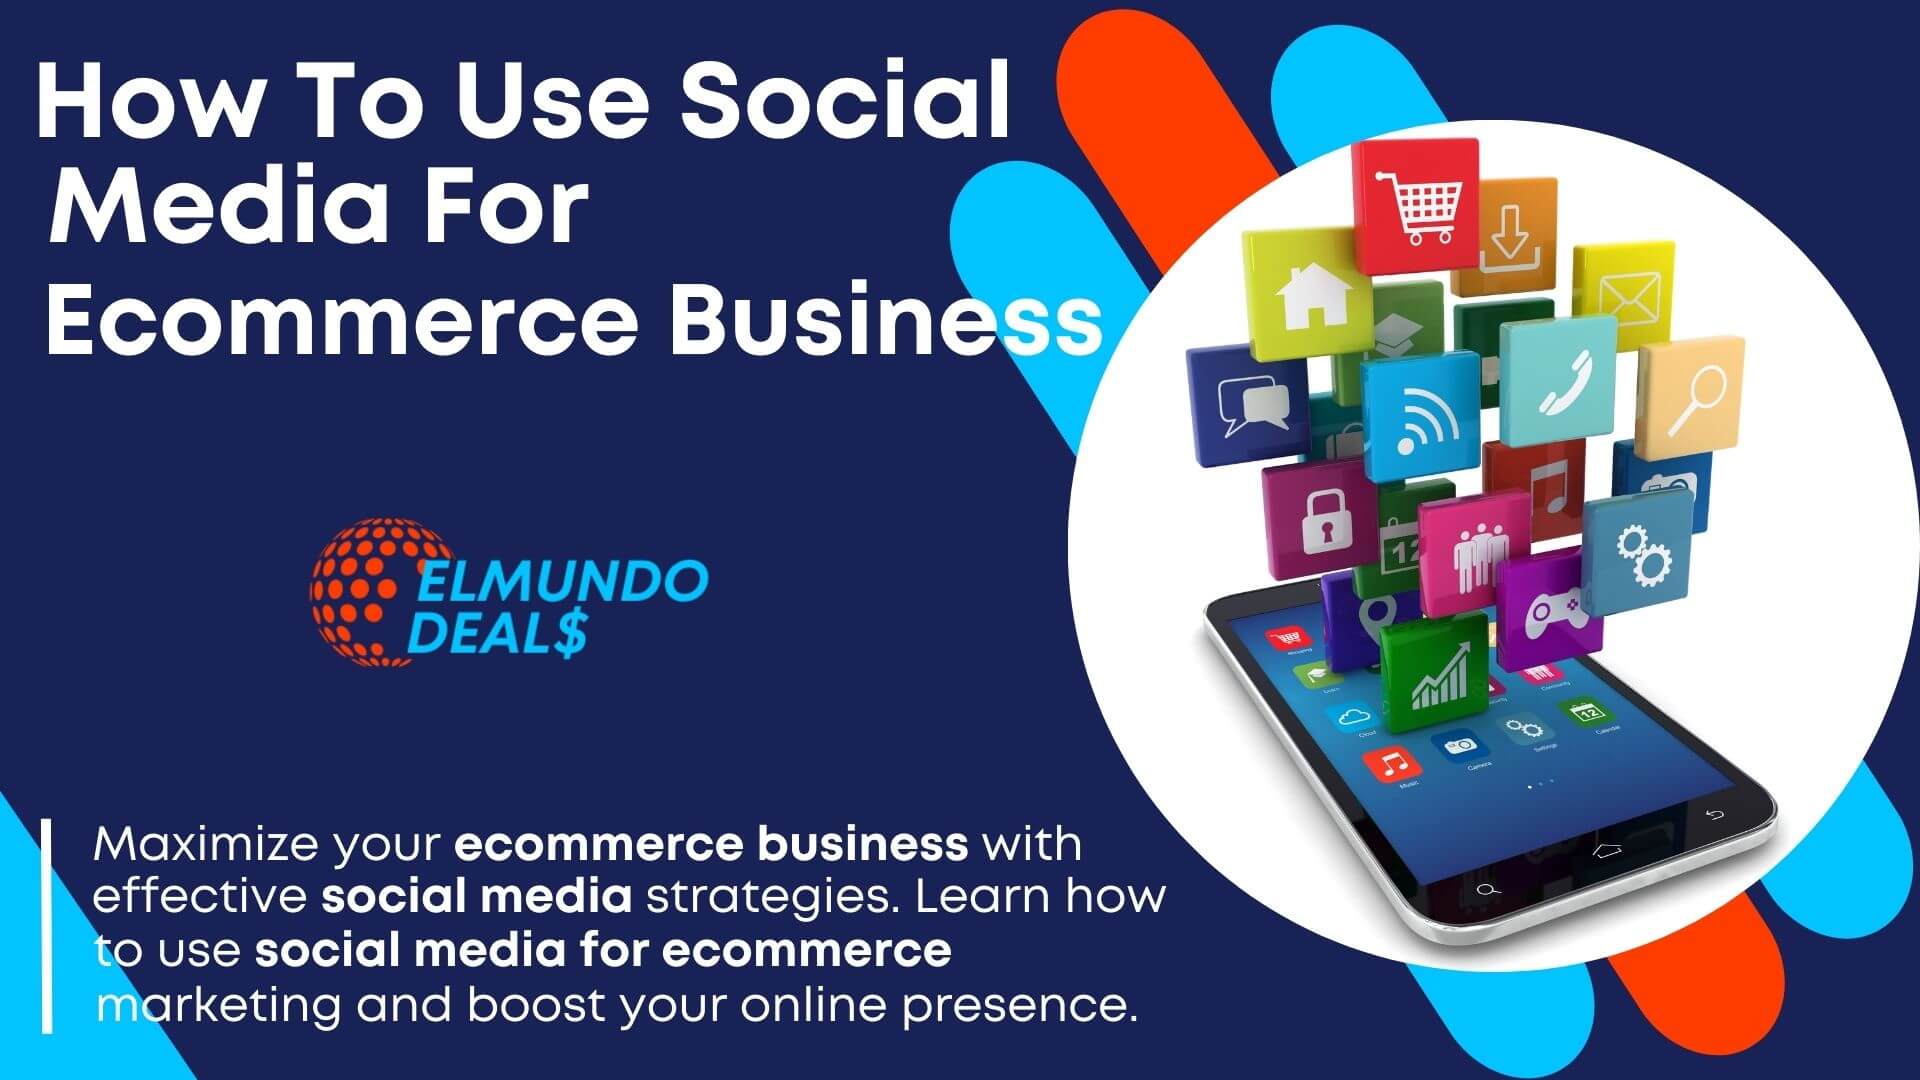 How To Use Social Media For Ecommerce Business: Strong Presence